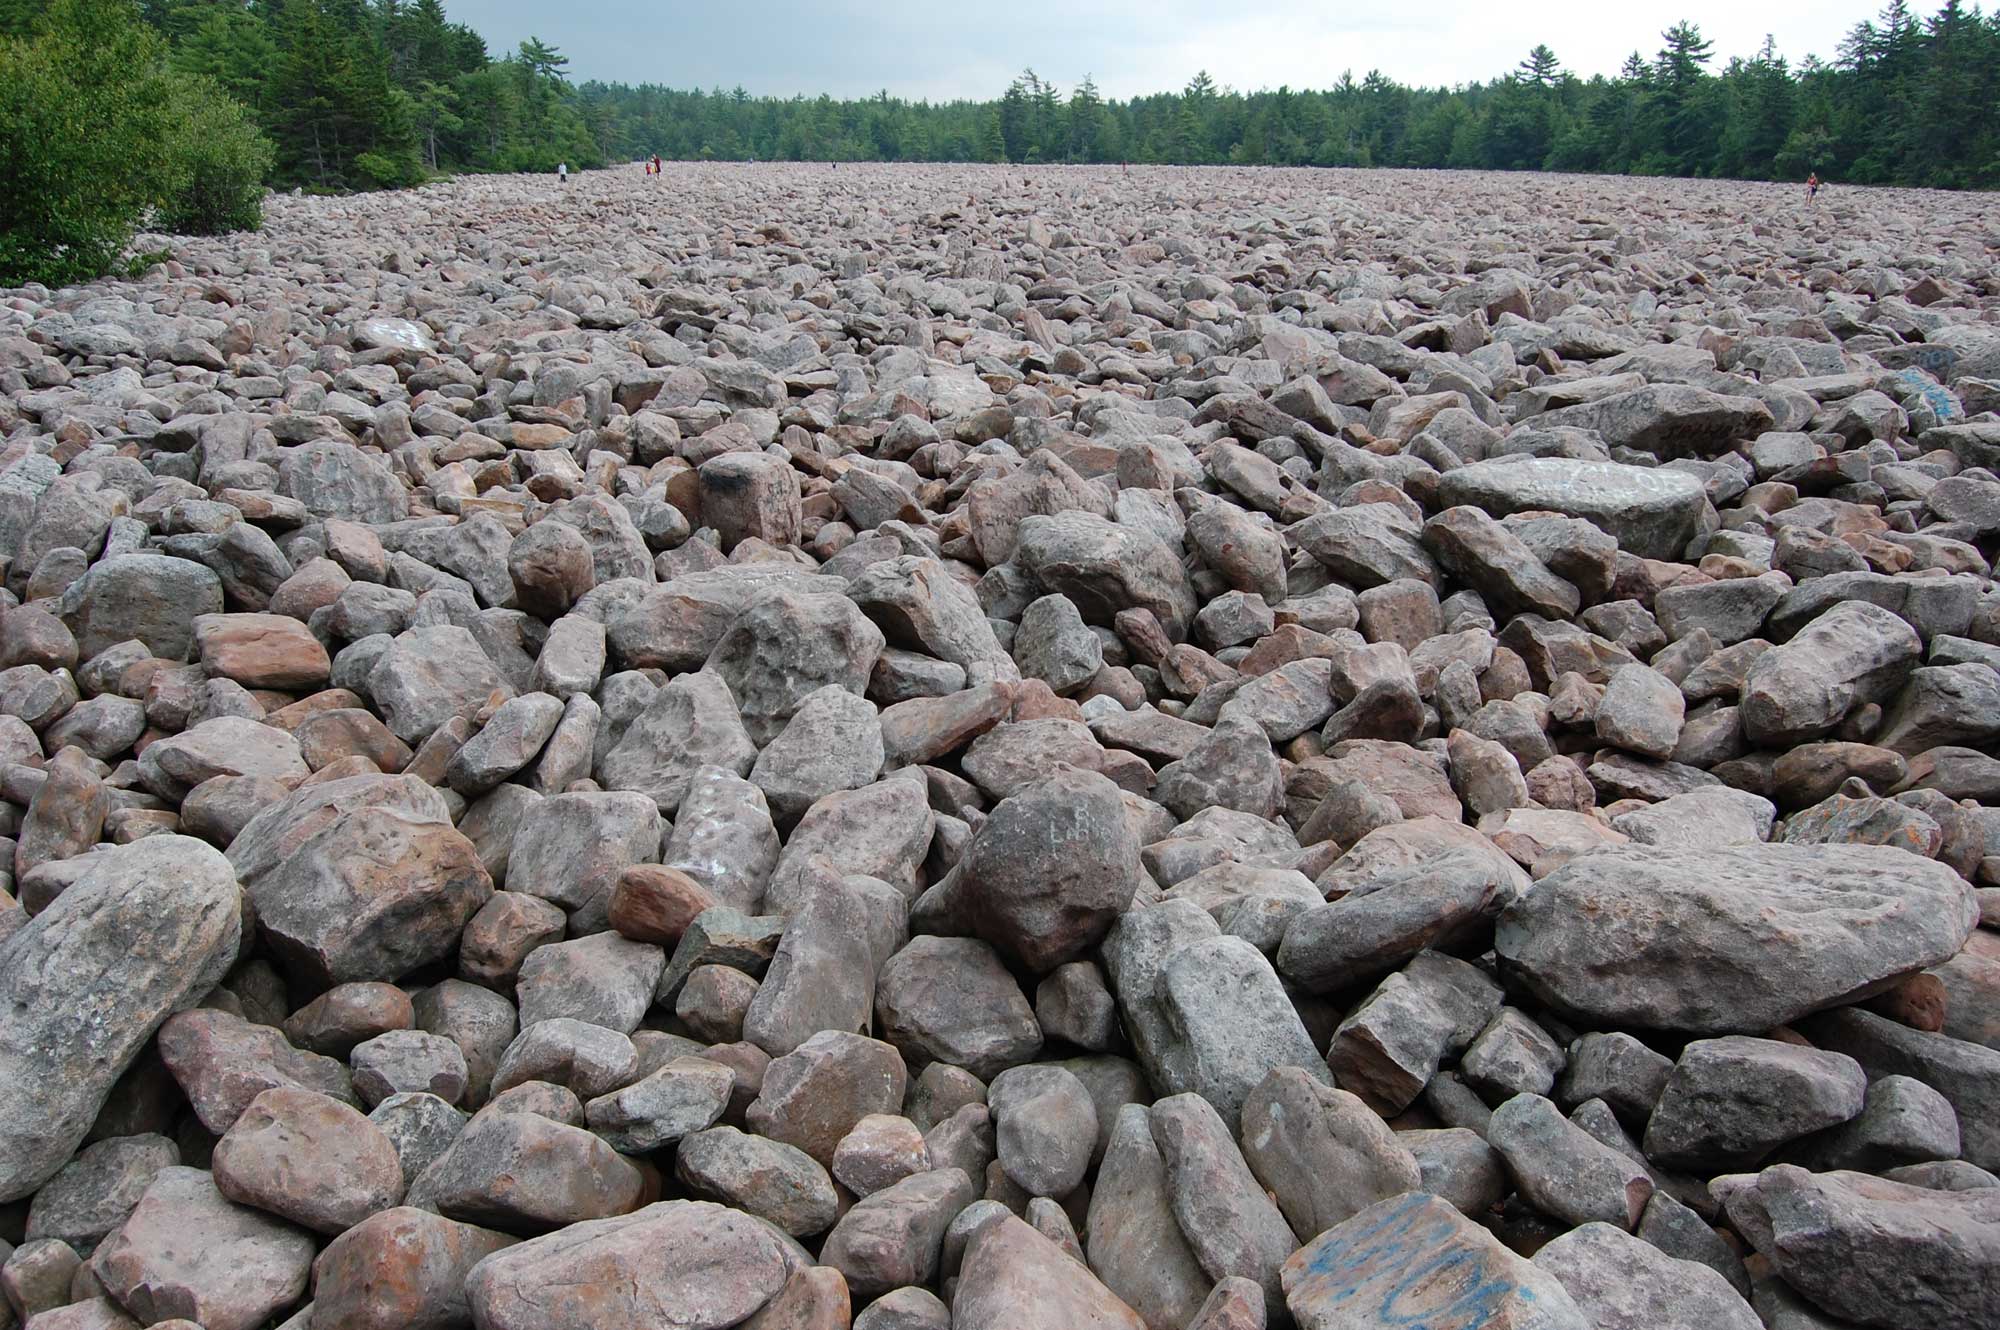 Photograph of the boulder field at Hickory Run State Park, Pennsylvania. The photo shows a field covered completely with numerous pinkish boulders. In the far distance, people can be seen in the field. Forest flanks the edges of the field in the background of the image.